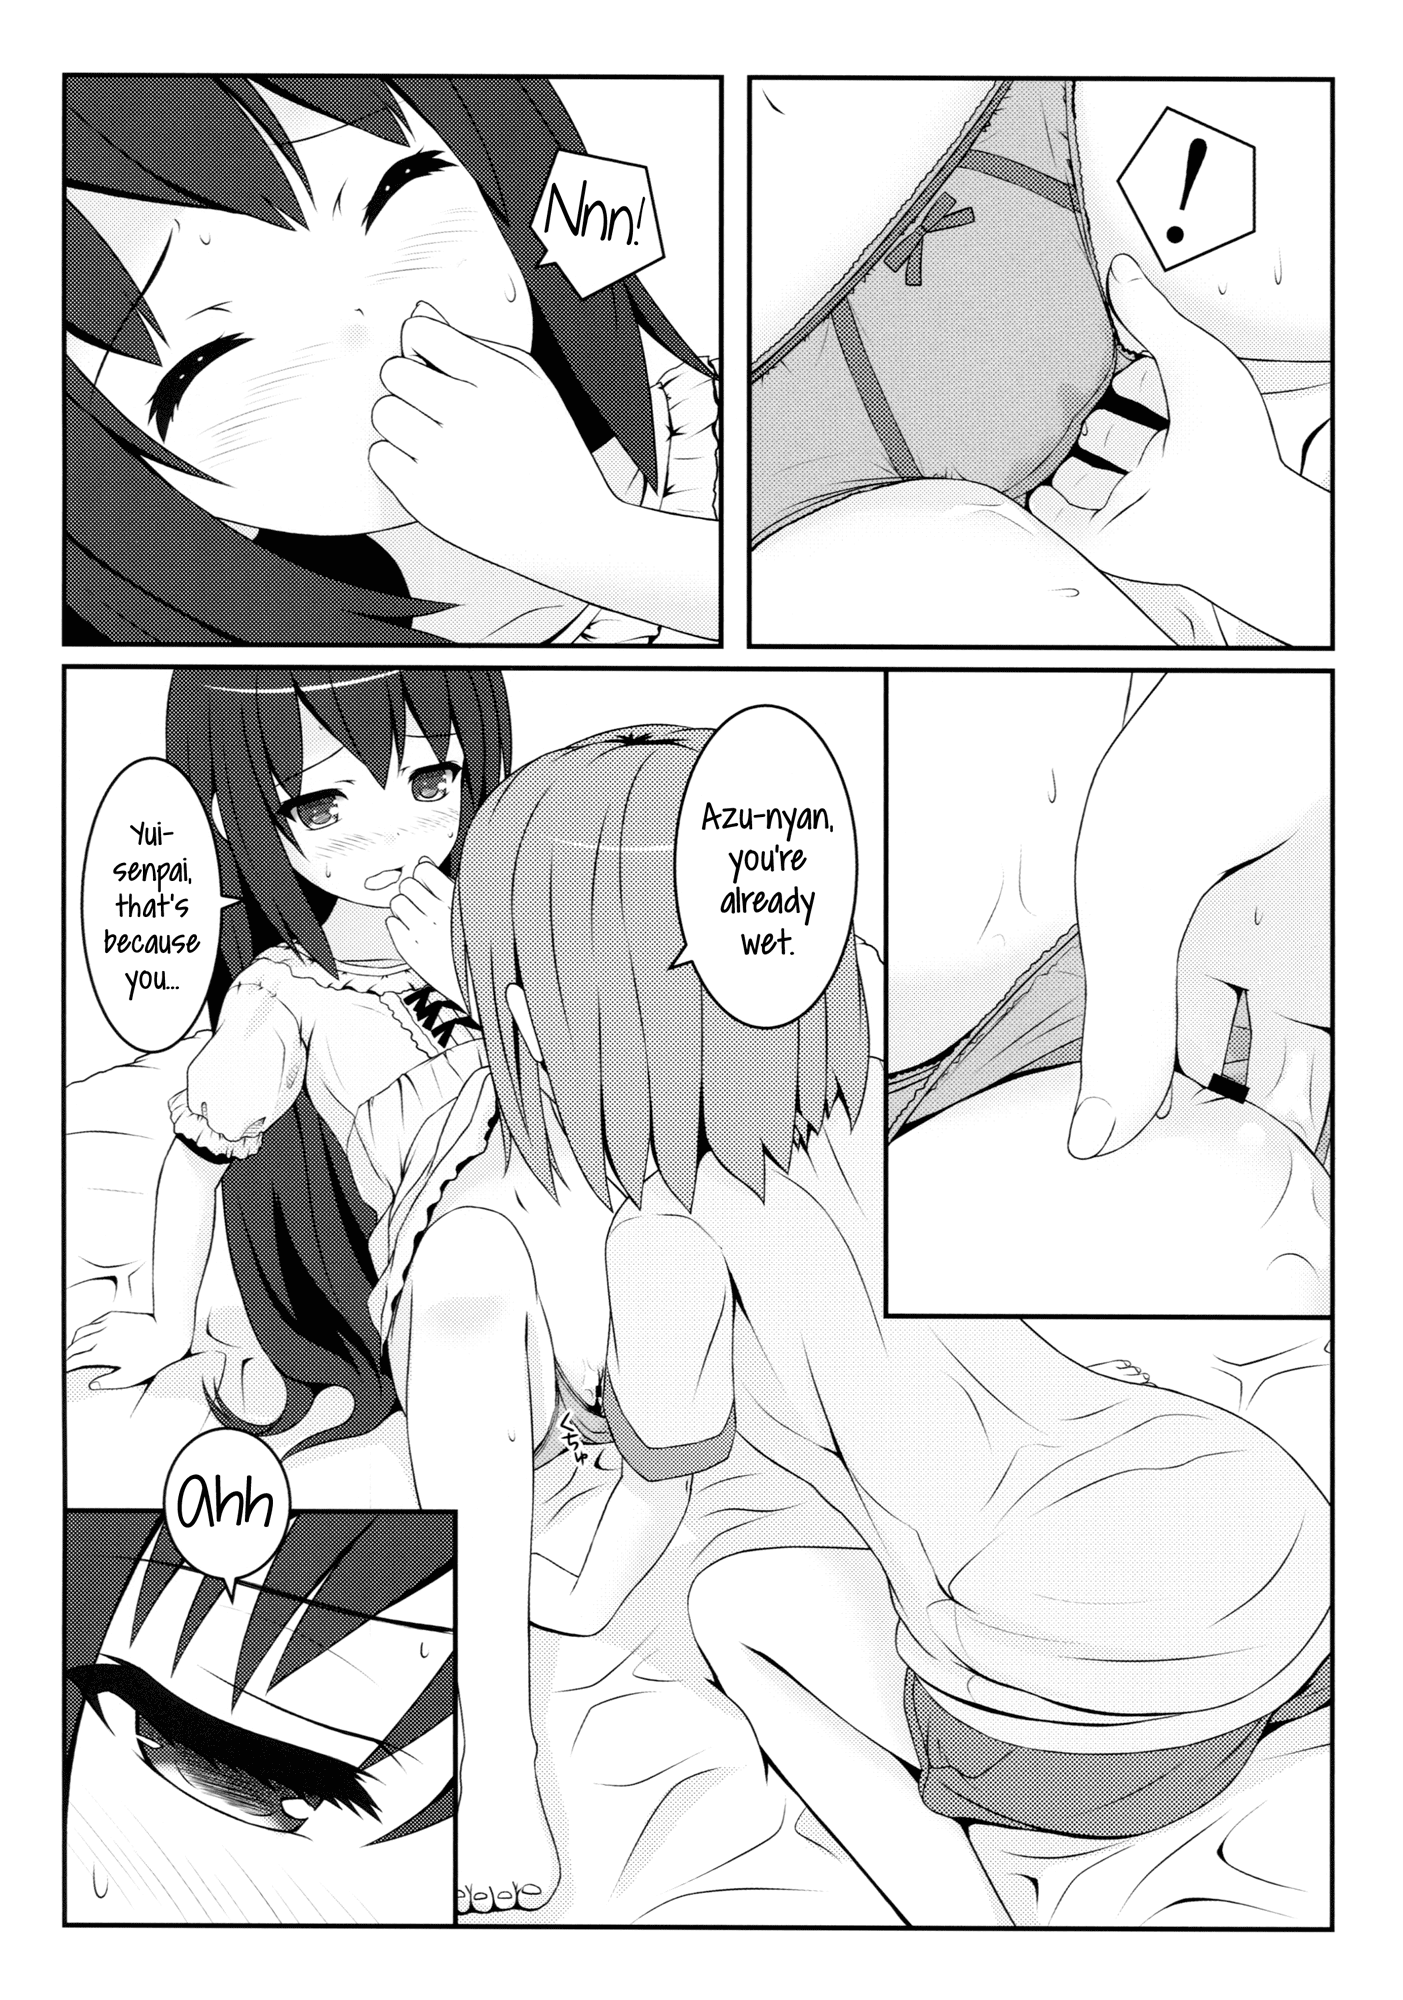 Magic for Nighttime Only hentai manga picture 5